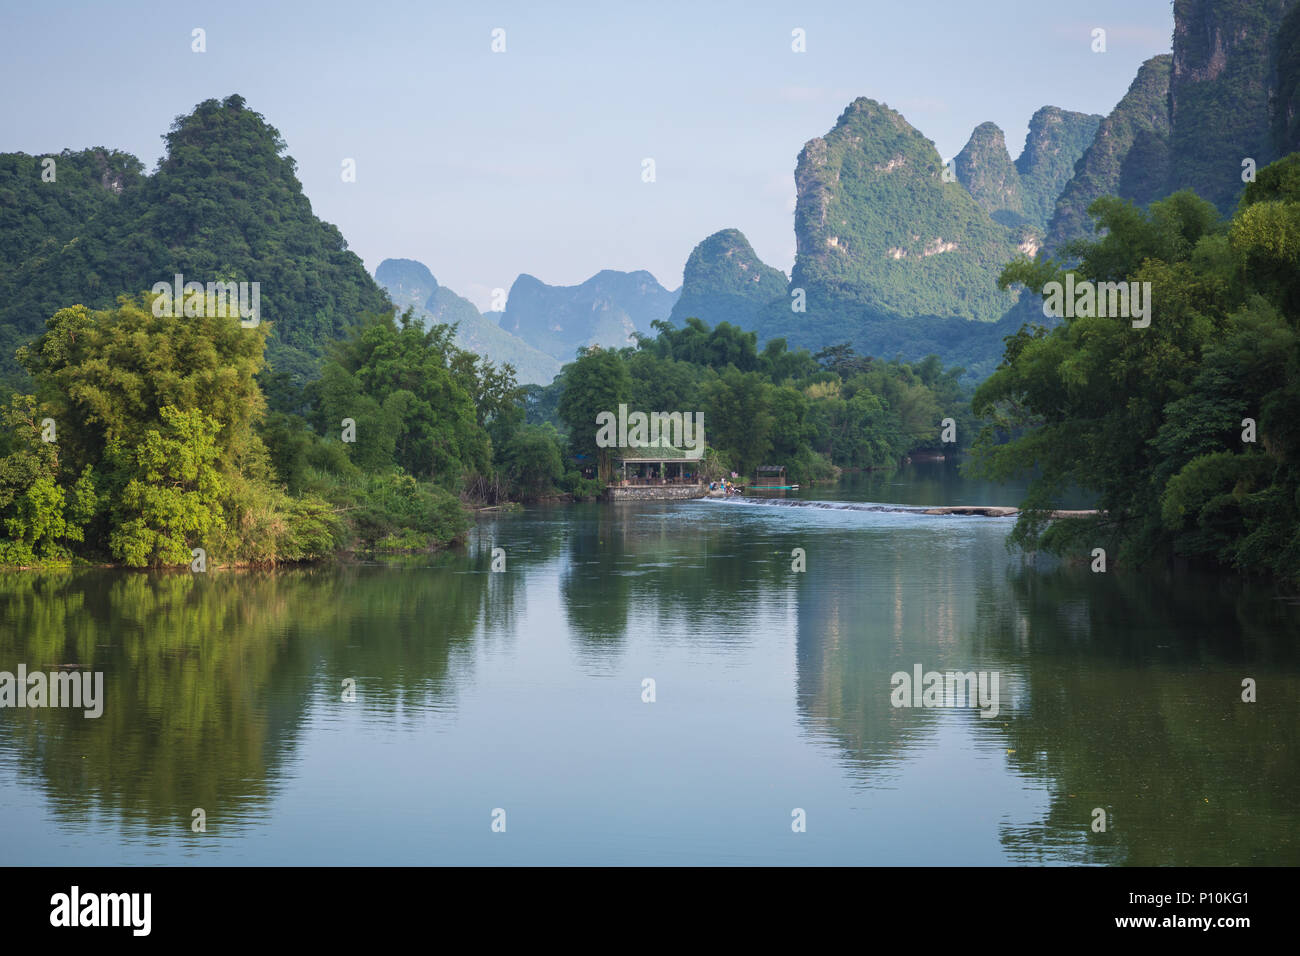 Scenic view of Yulong River among green woods and karst mountains at Yangshuo County of Guilin, China. Yangshuo is a popular tourist destination of As Stock Photo